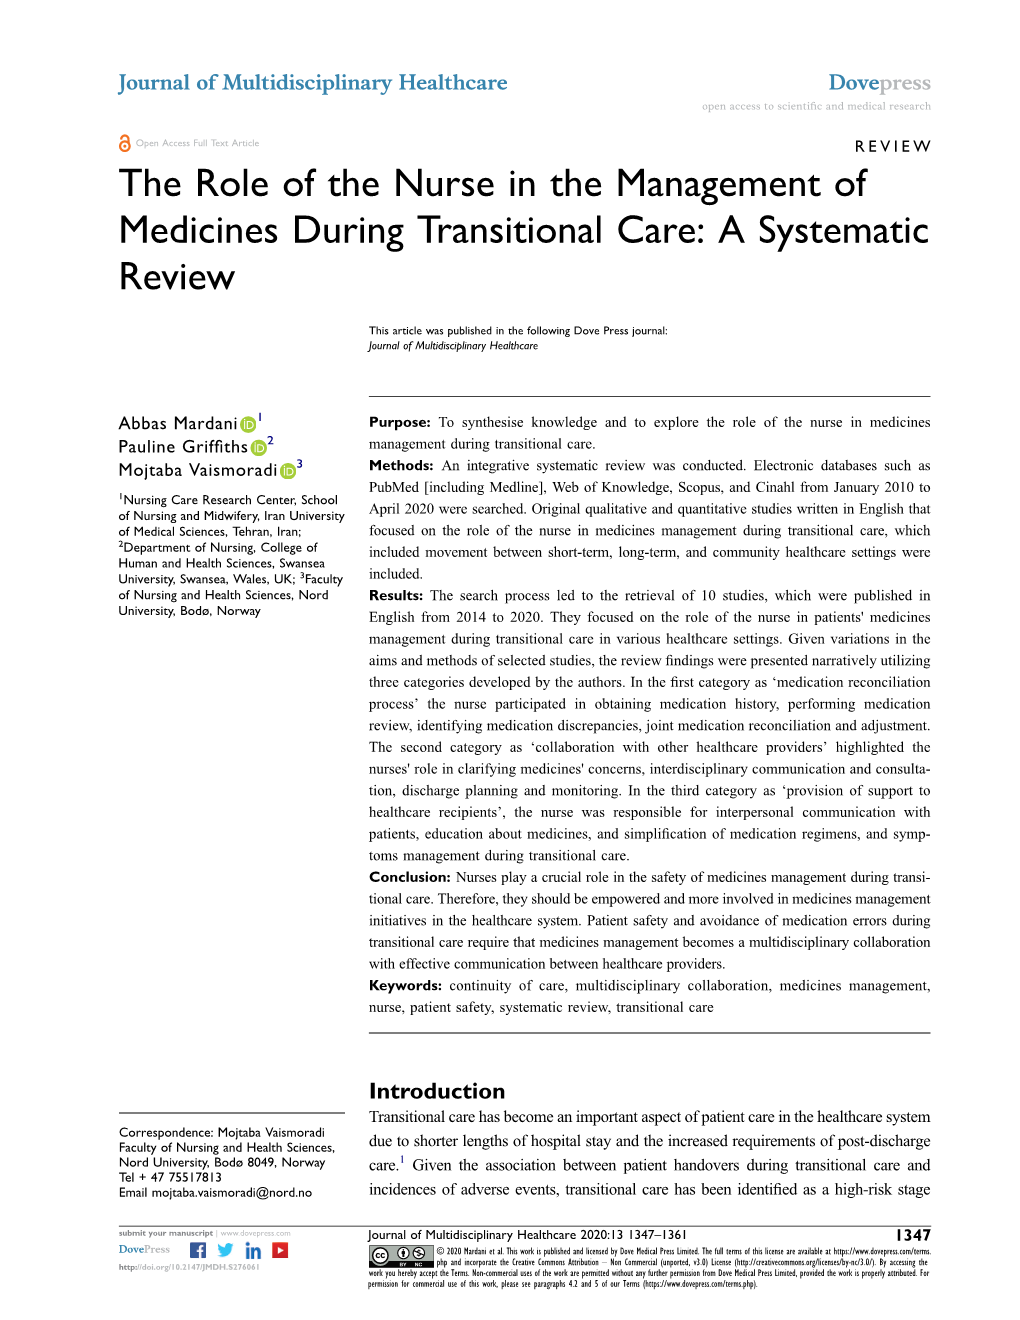 The Role of the Nurse in the Management of Medicines During Transitional Care: a Systematic Review